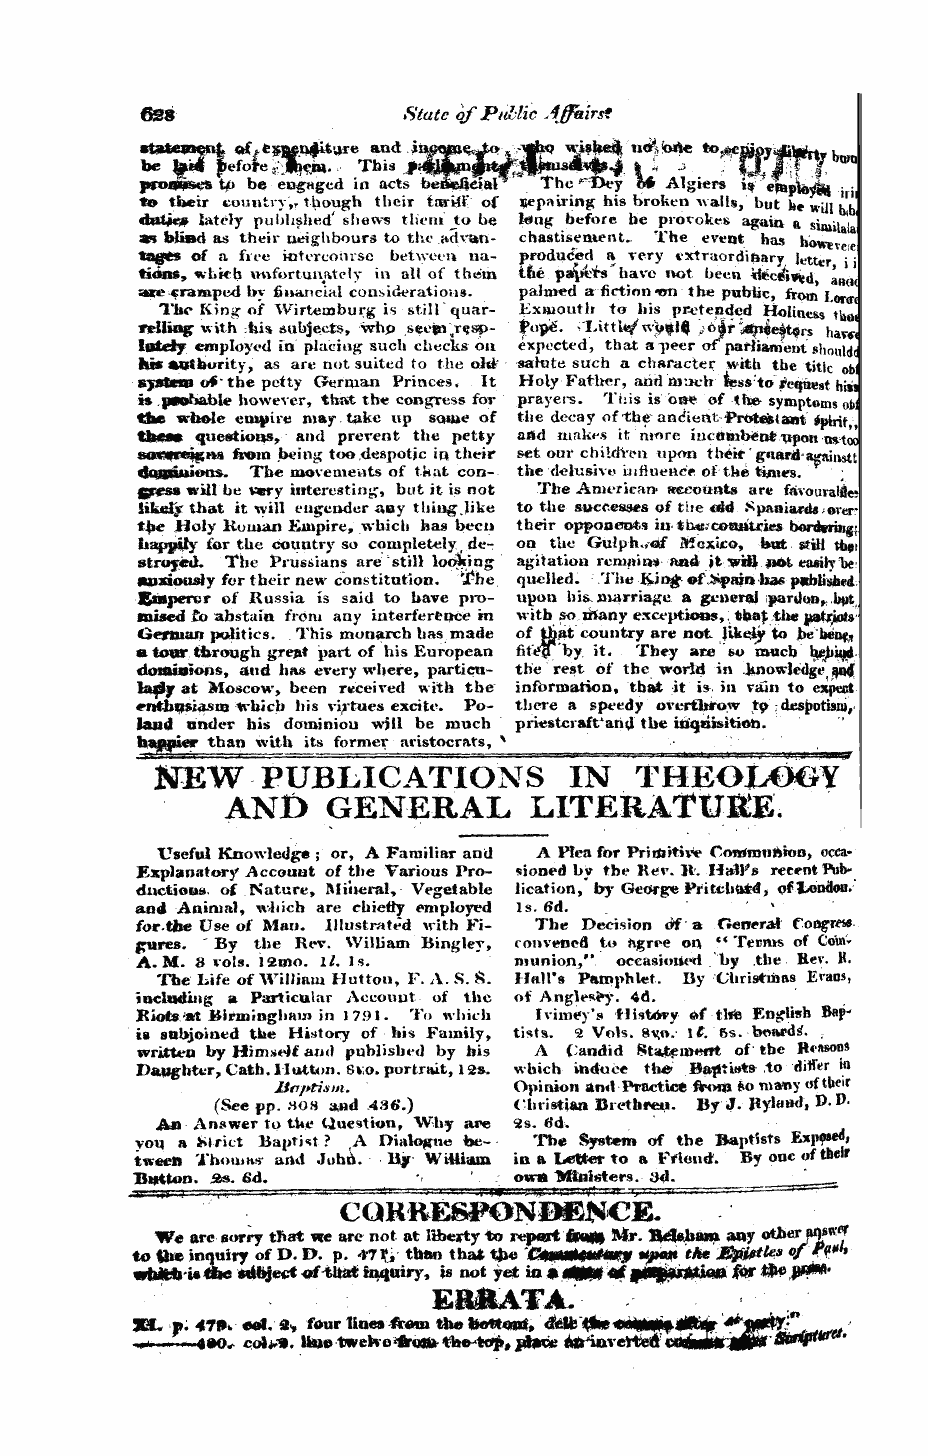 Monthly Repository (1806-1838) and Unitarian Chronicle (1832-1833): F Y, 1st edition - Istew Publications In Theoi^^Y And General Literattj^E.